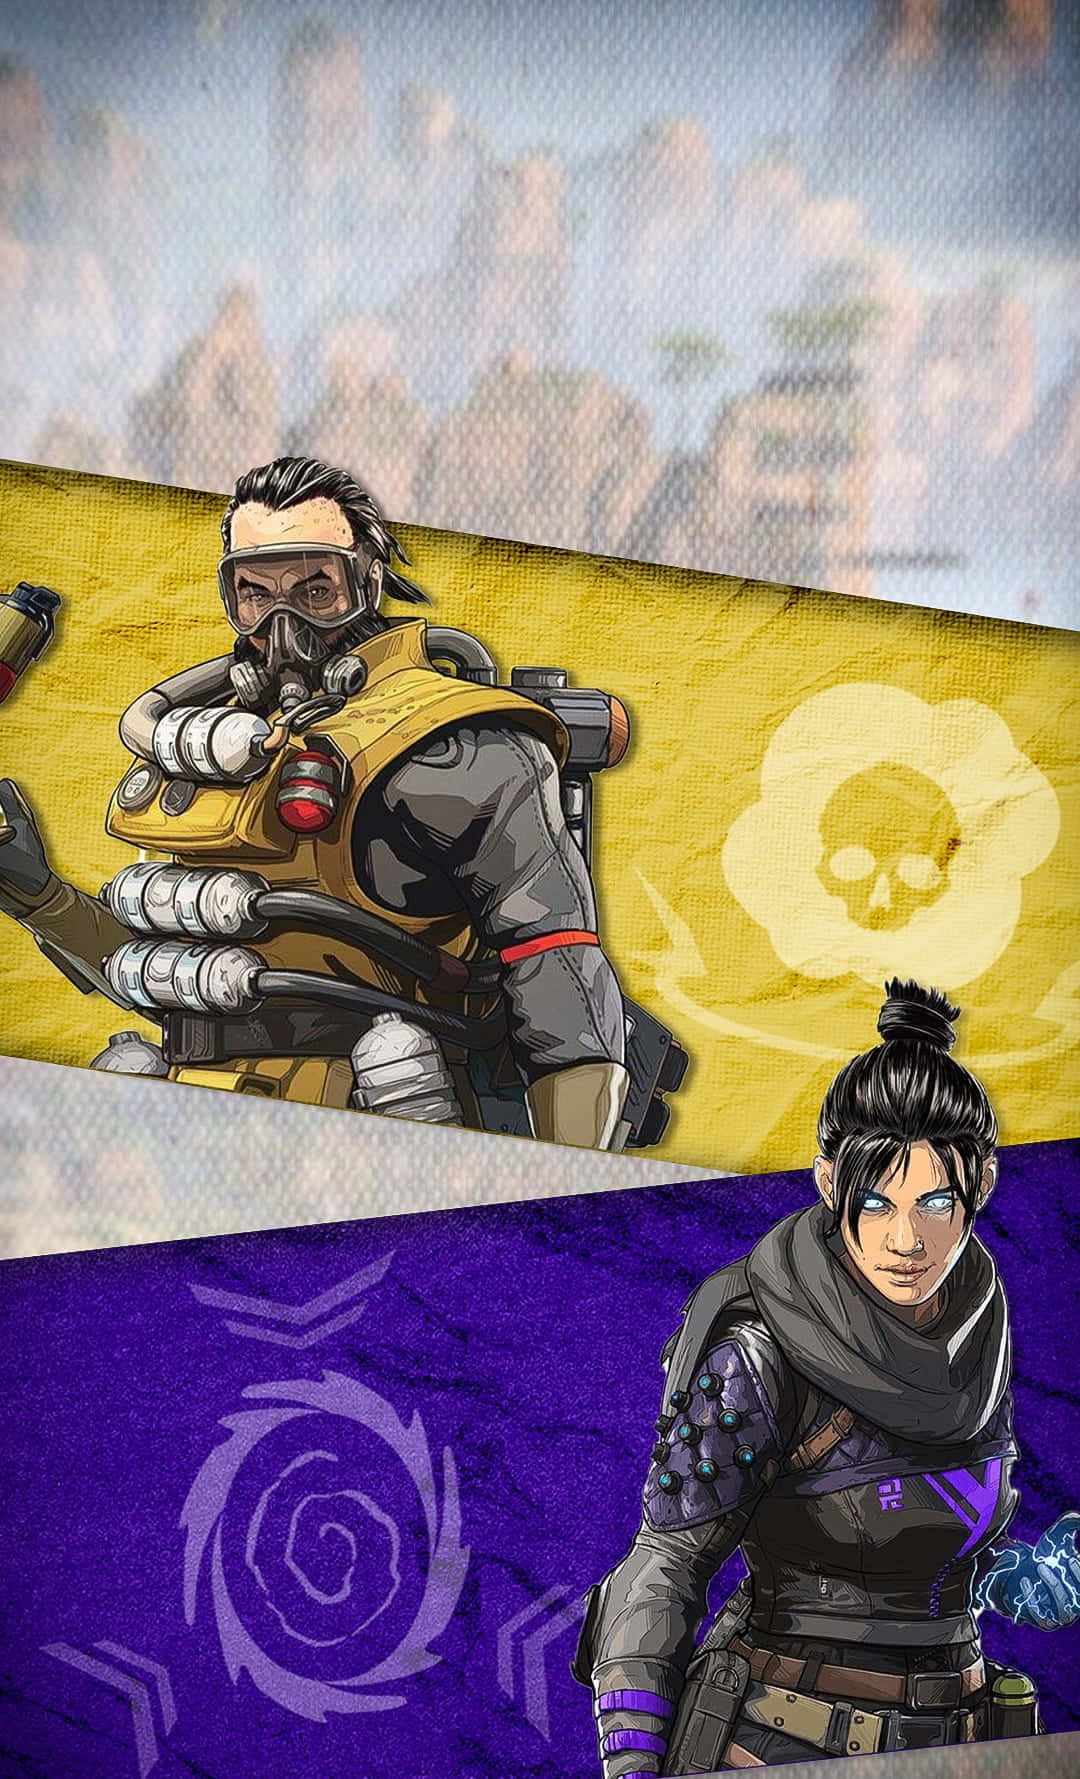 Caption: Deadly Force In Gas - Apex Legends' Caustic In Action Wallpaper